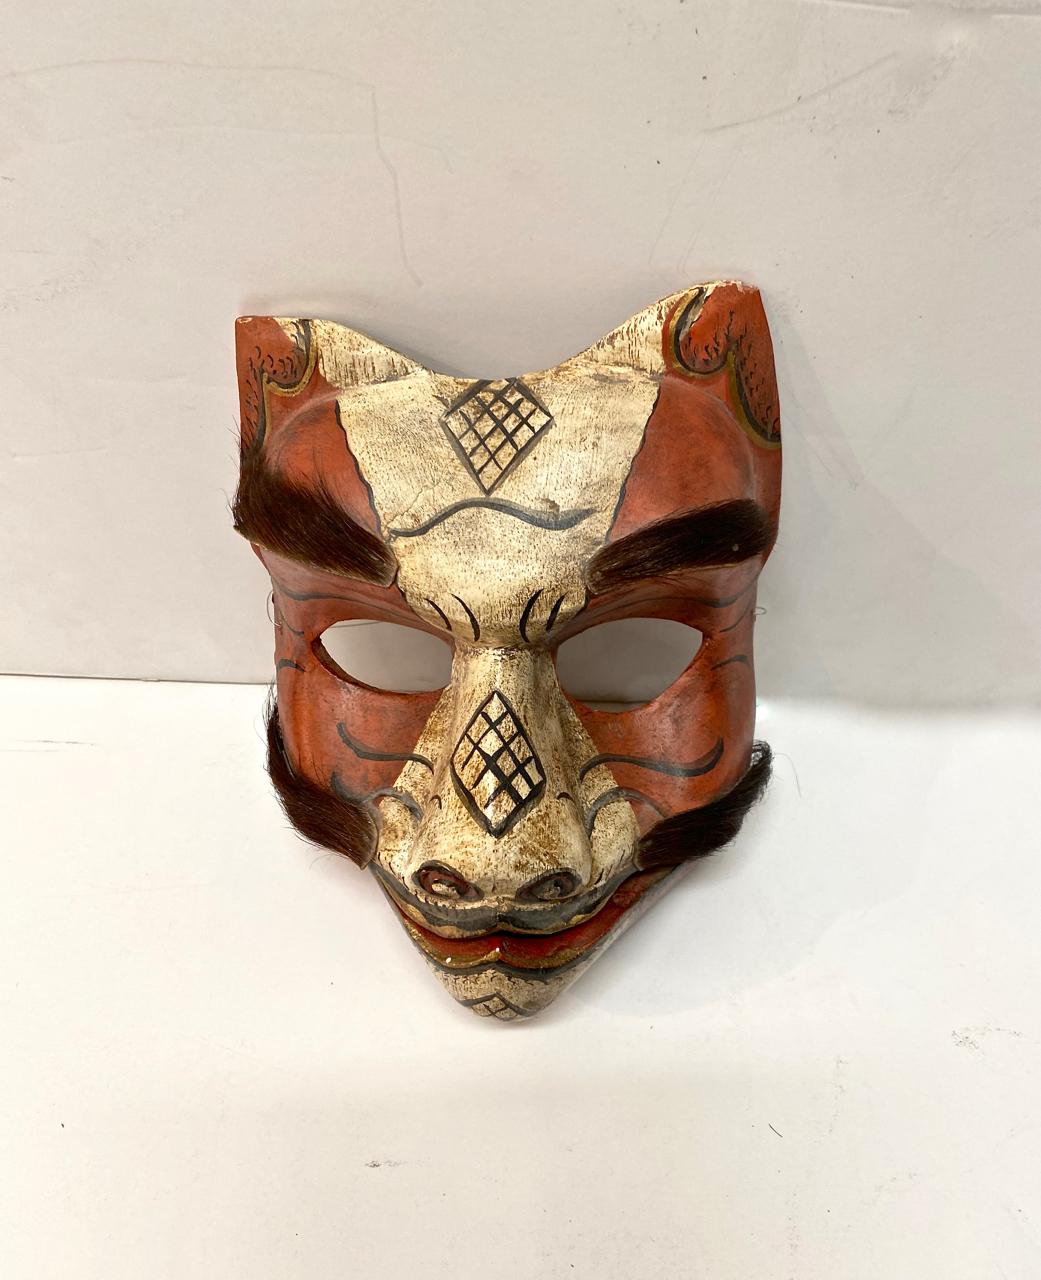 This is a wonderfully expressive and articulated fox mask. The mask dates to the first half of the 20th century and is in overall good condition. The fox's jaw is articulated and he is decorated with real fur for his eyebrows and mustache. In Japan